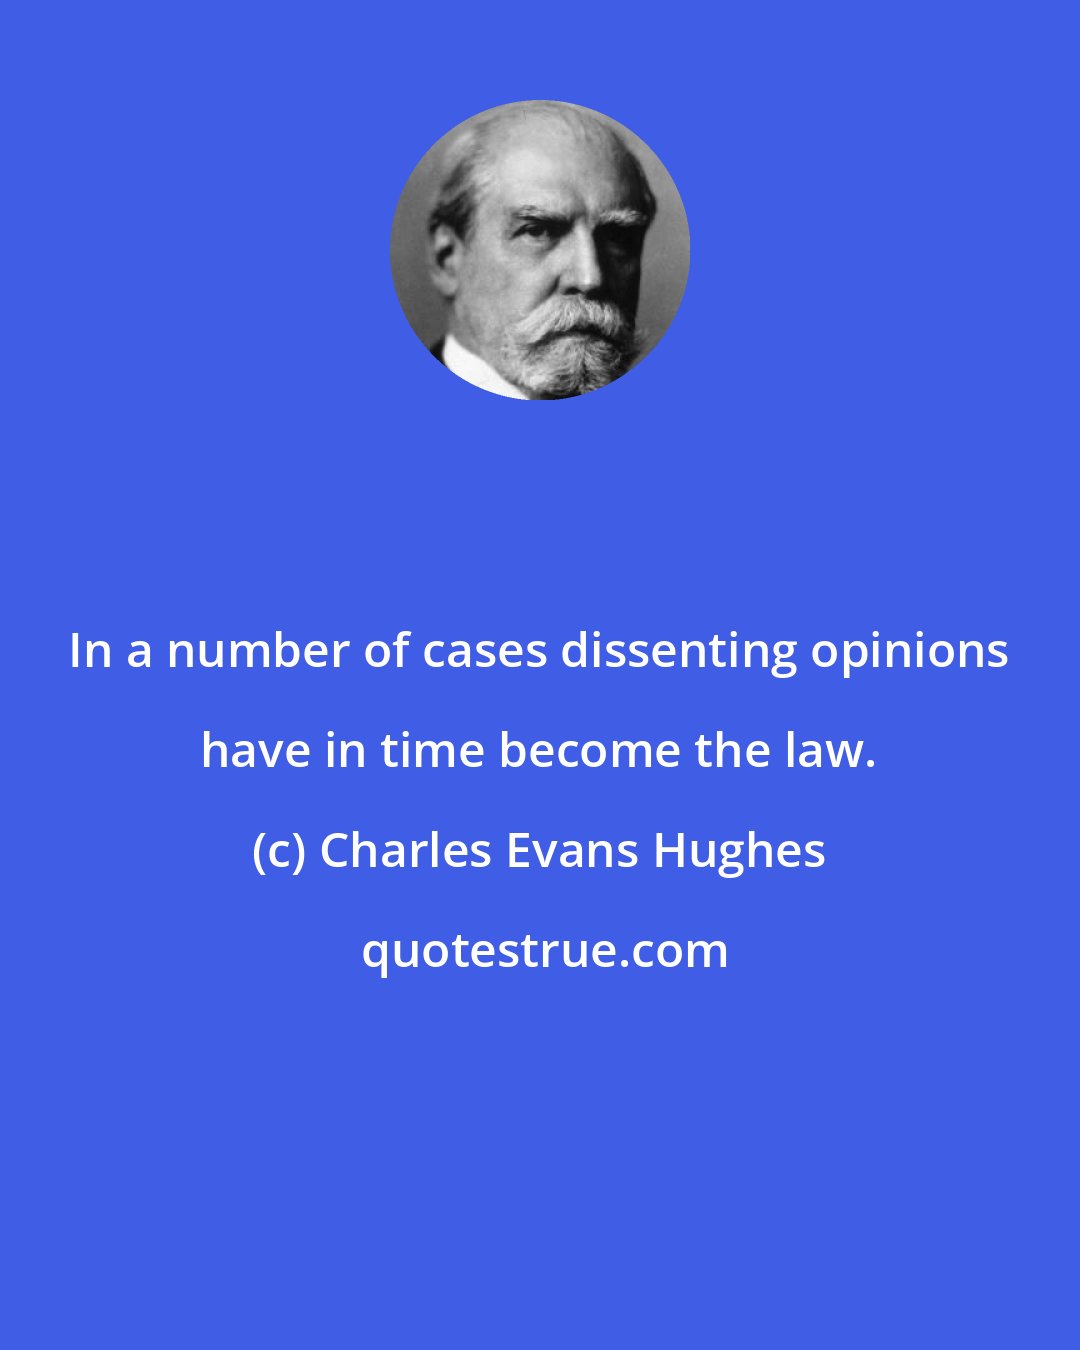 Charles Evans Hughes: In a number of cases dissenting opinions have in time become the law.